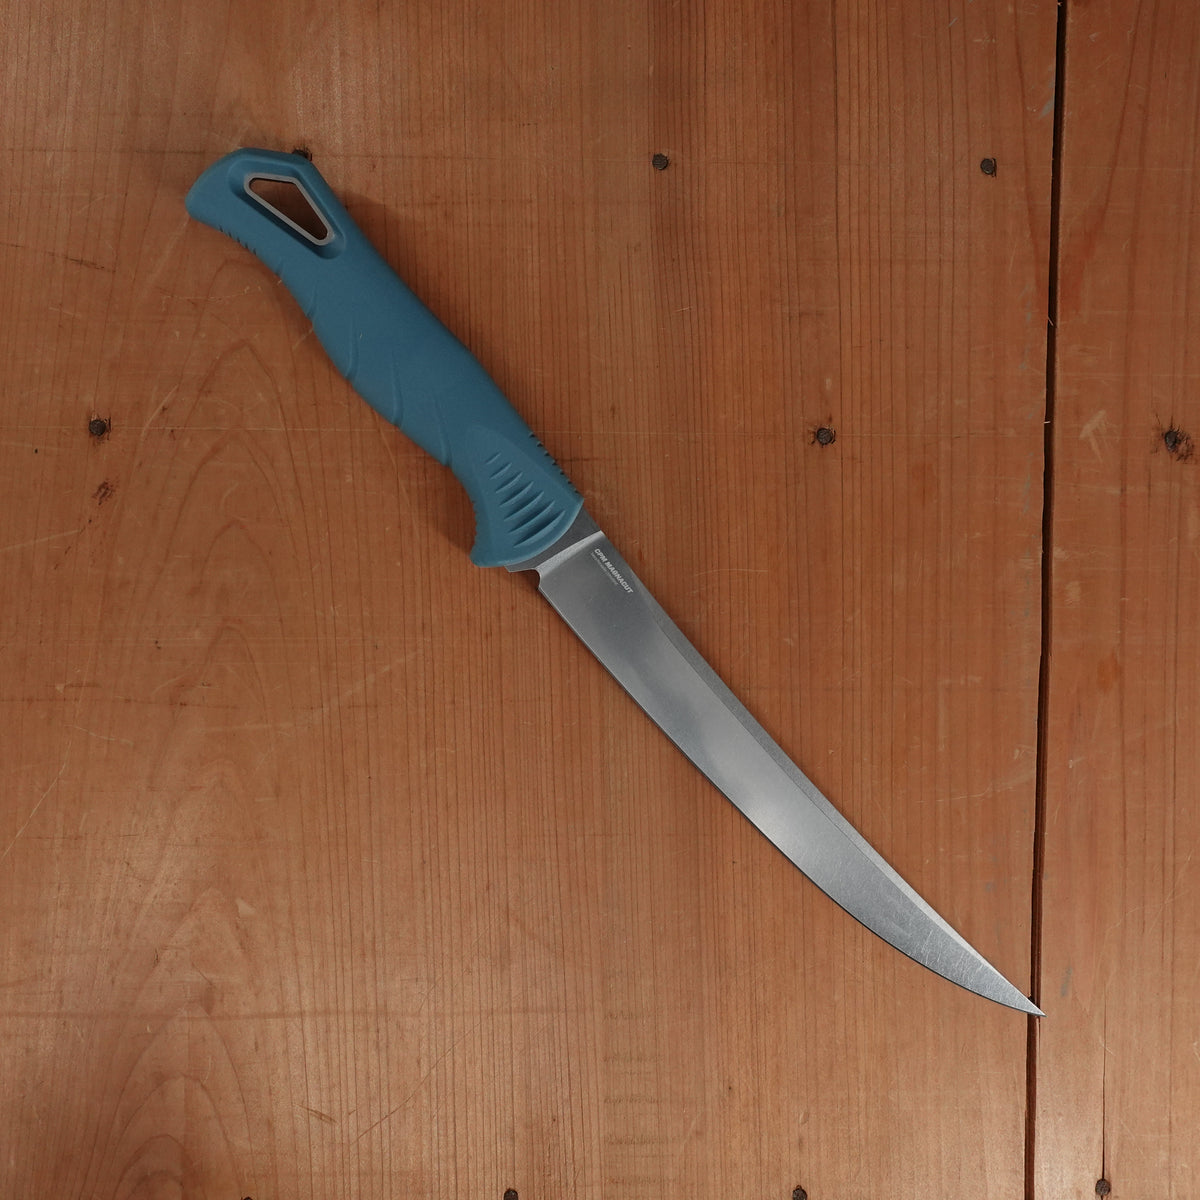 Benchmade 18010 Fishcrafter 7” Trailing Point CPM-Magnacut Fixed Blade Depth Blue Santoprene with Sheath